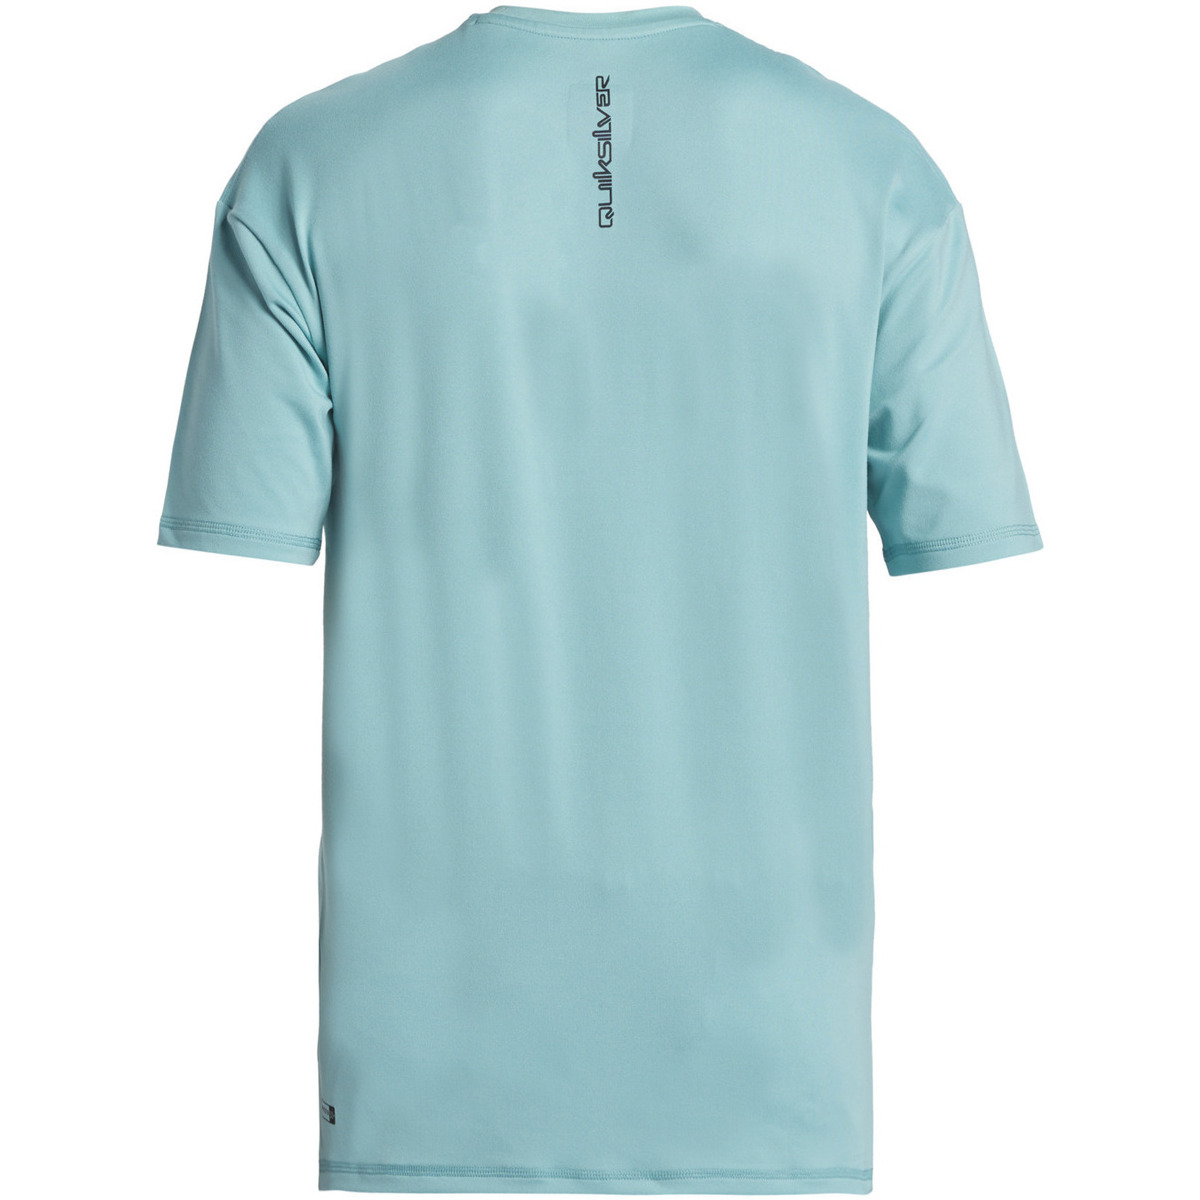 Quiksilver Bleu Everyday Surf Oedn4aCY